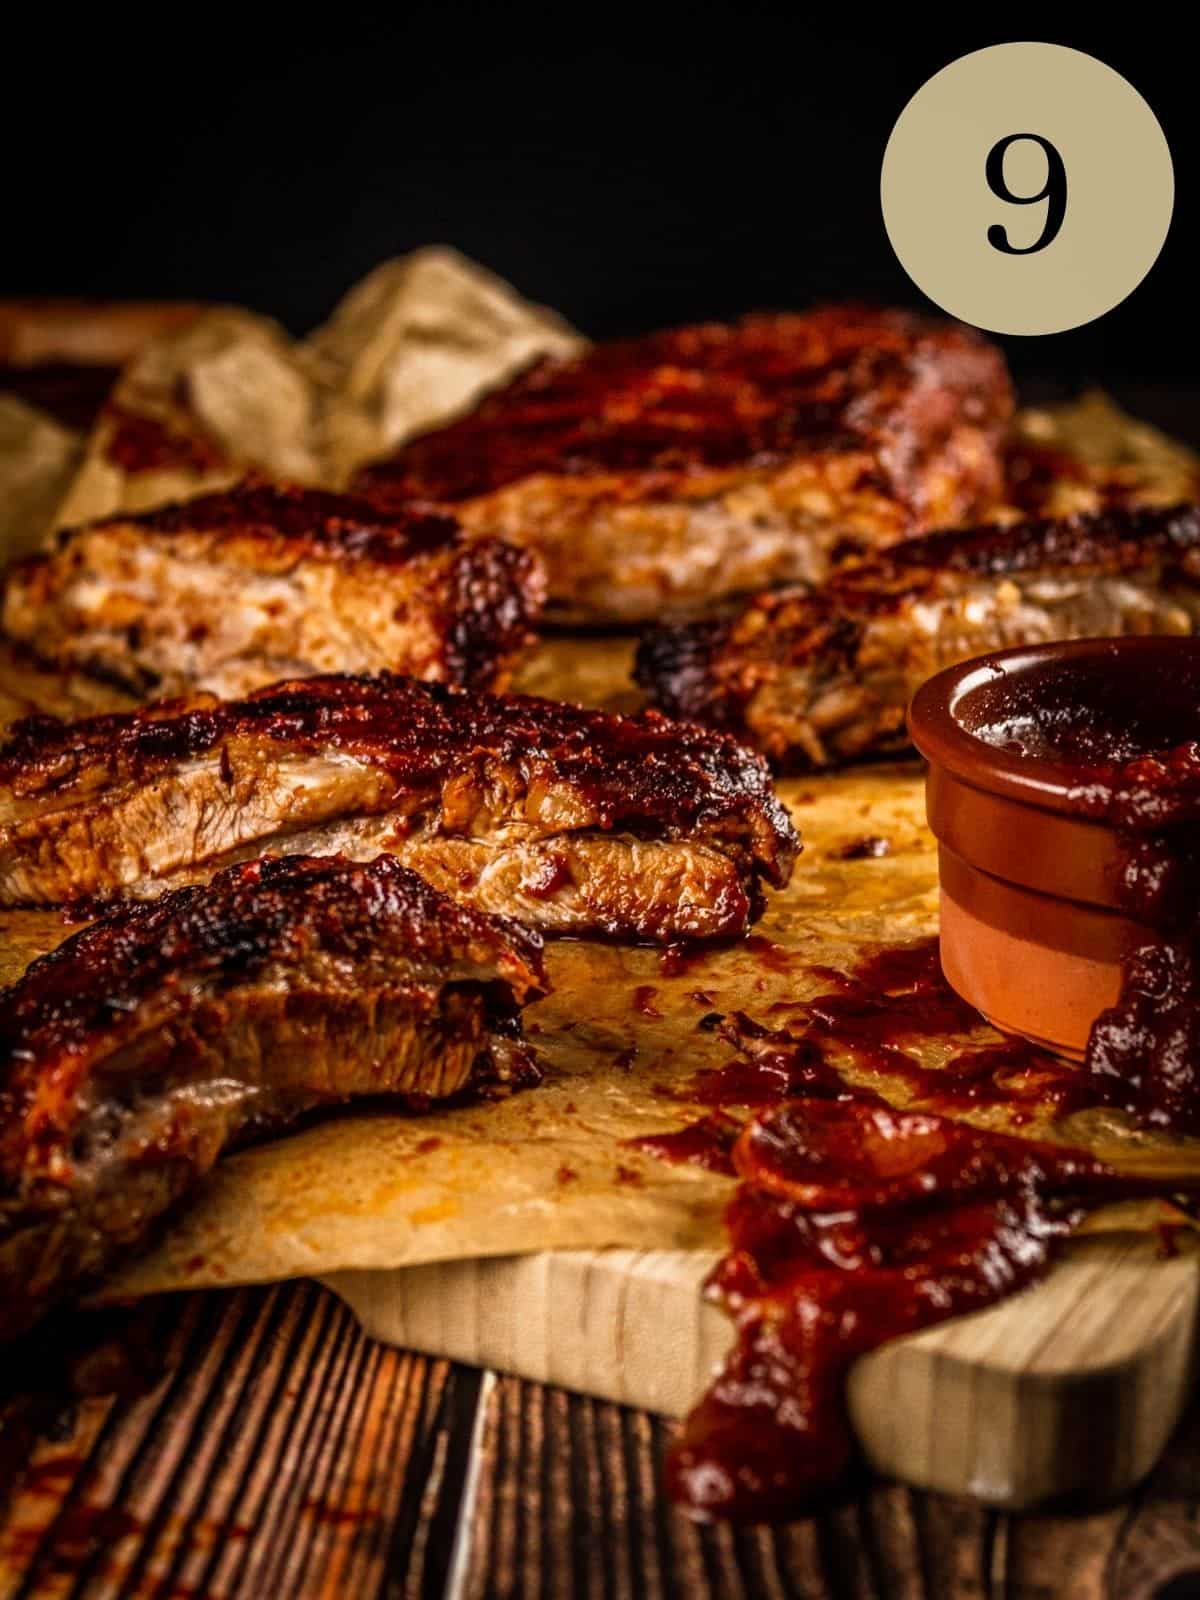 ribs cut into slices on a cutting board with barbecue sauce on dripping on them.